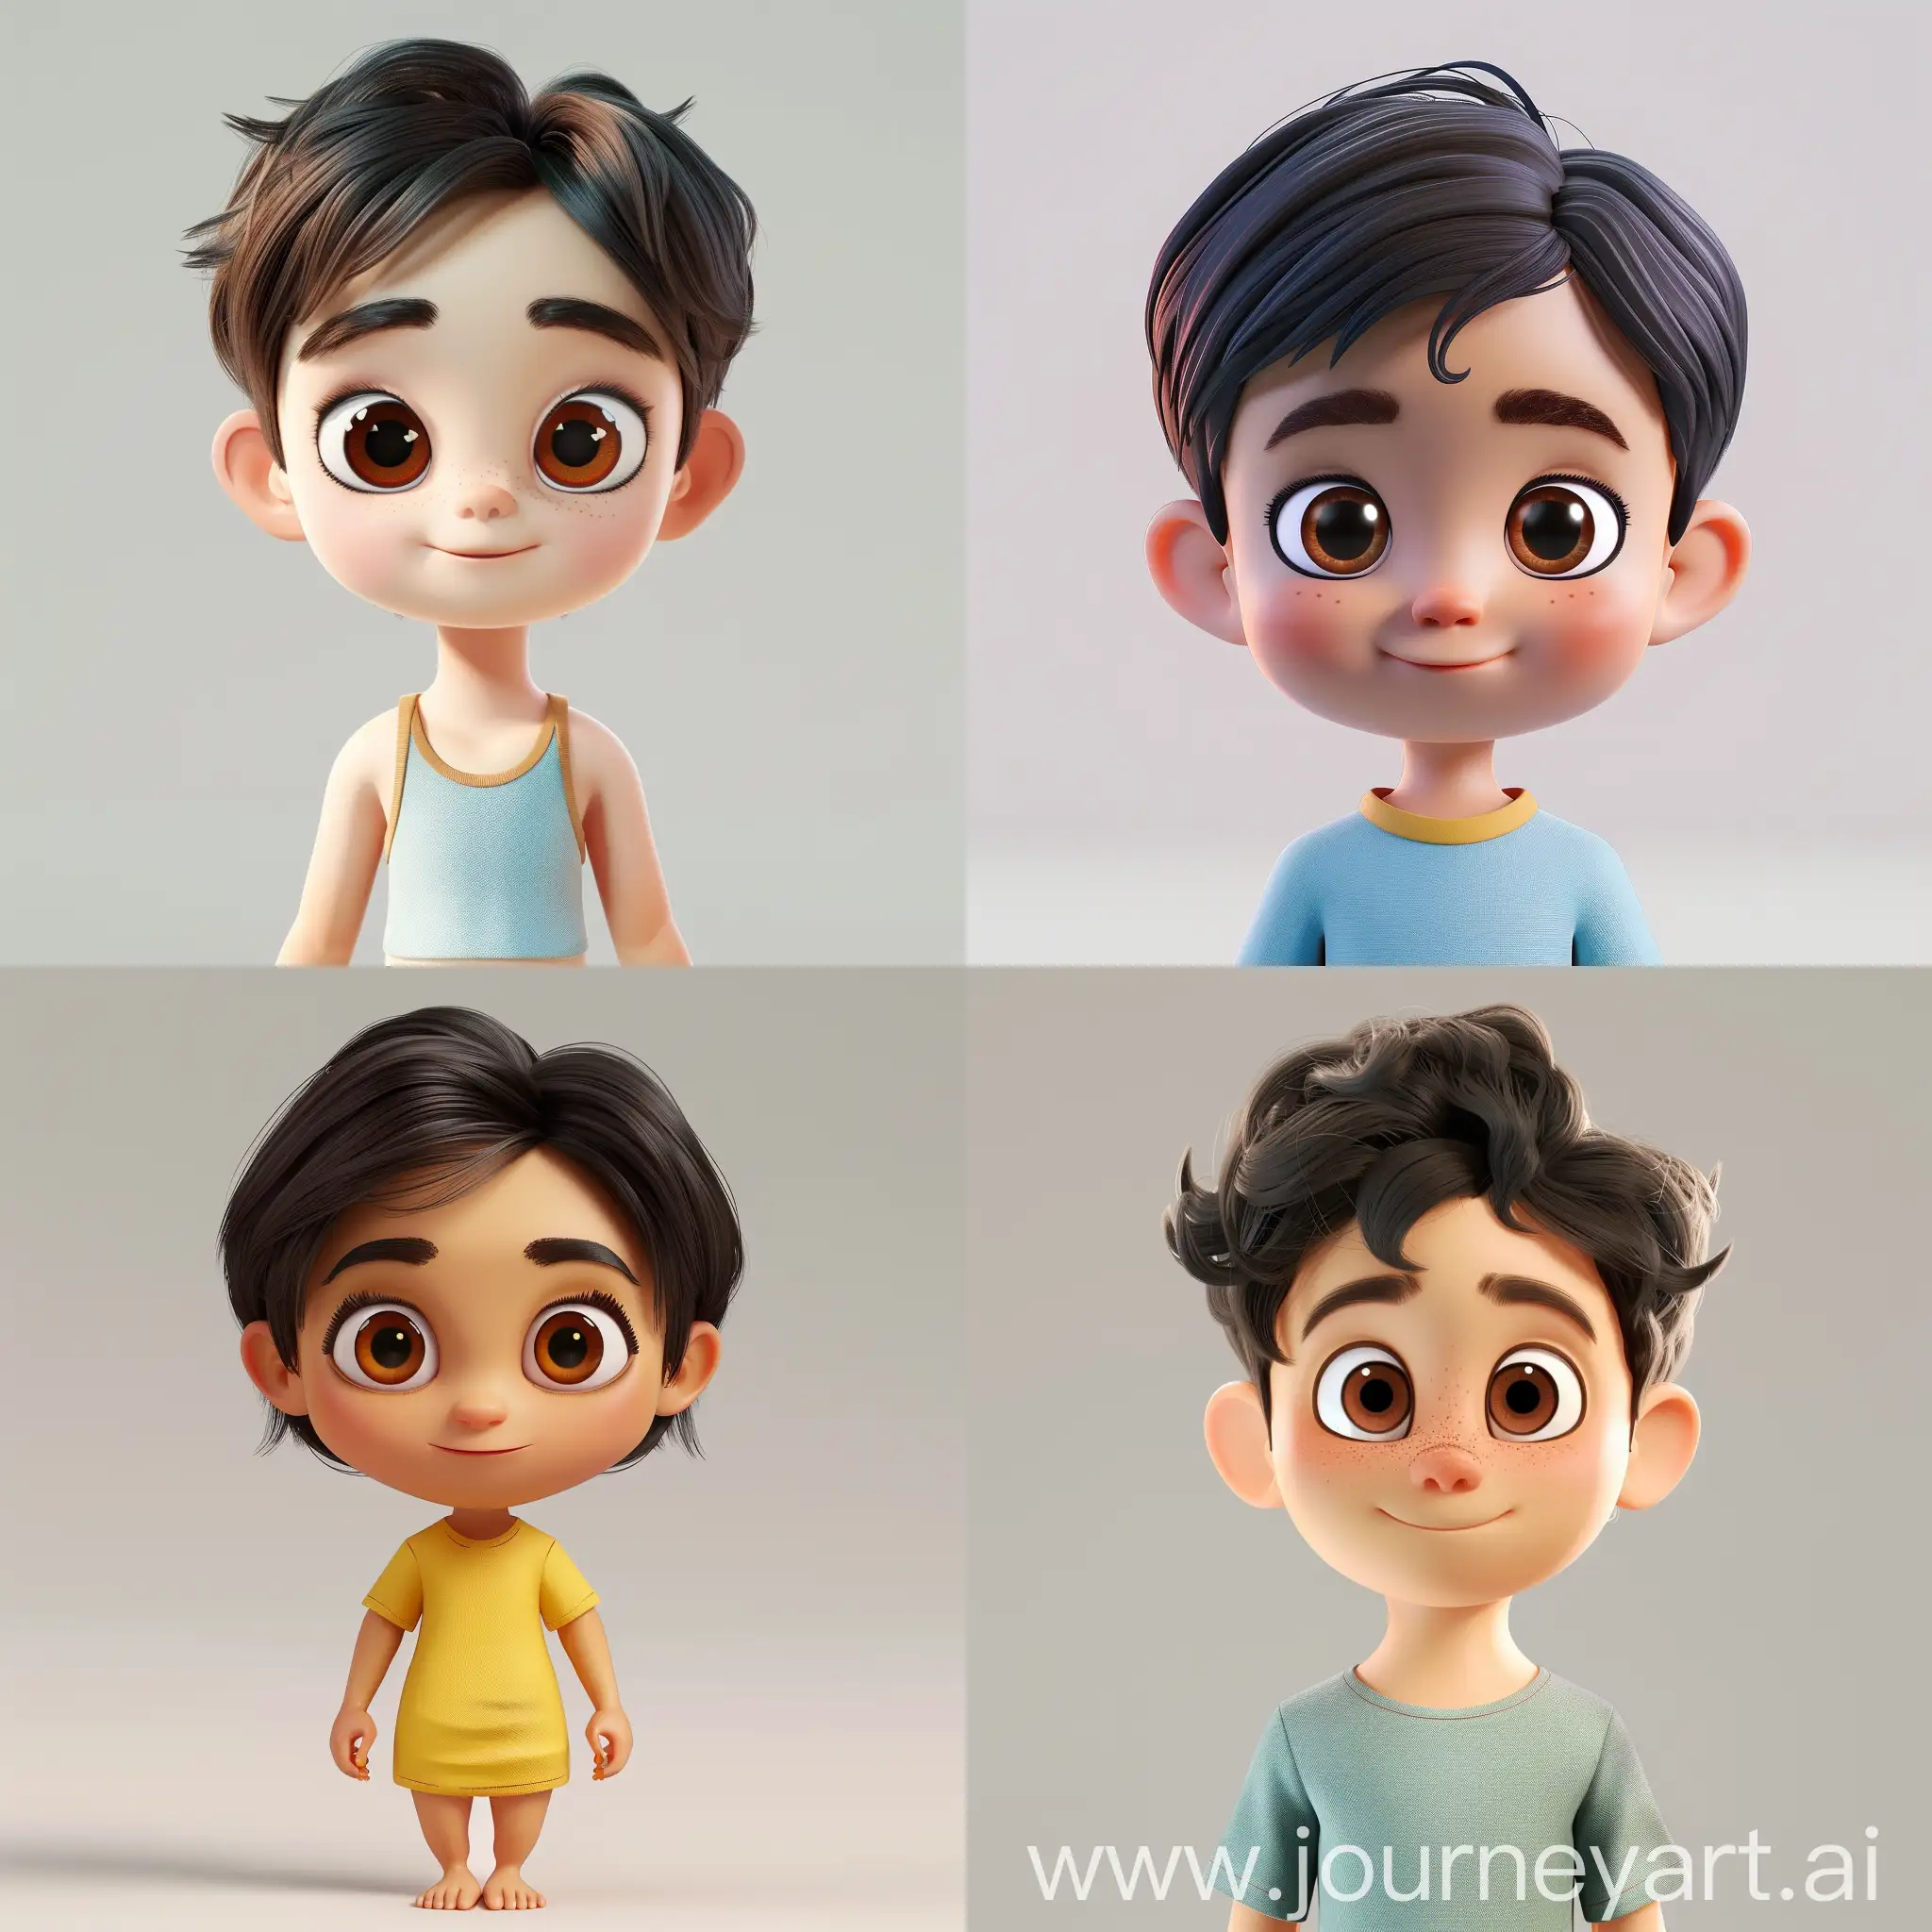 Adorable-PixarStyle-Cartoon-Character-with-Brown-Eyes-on-Plain-Background